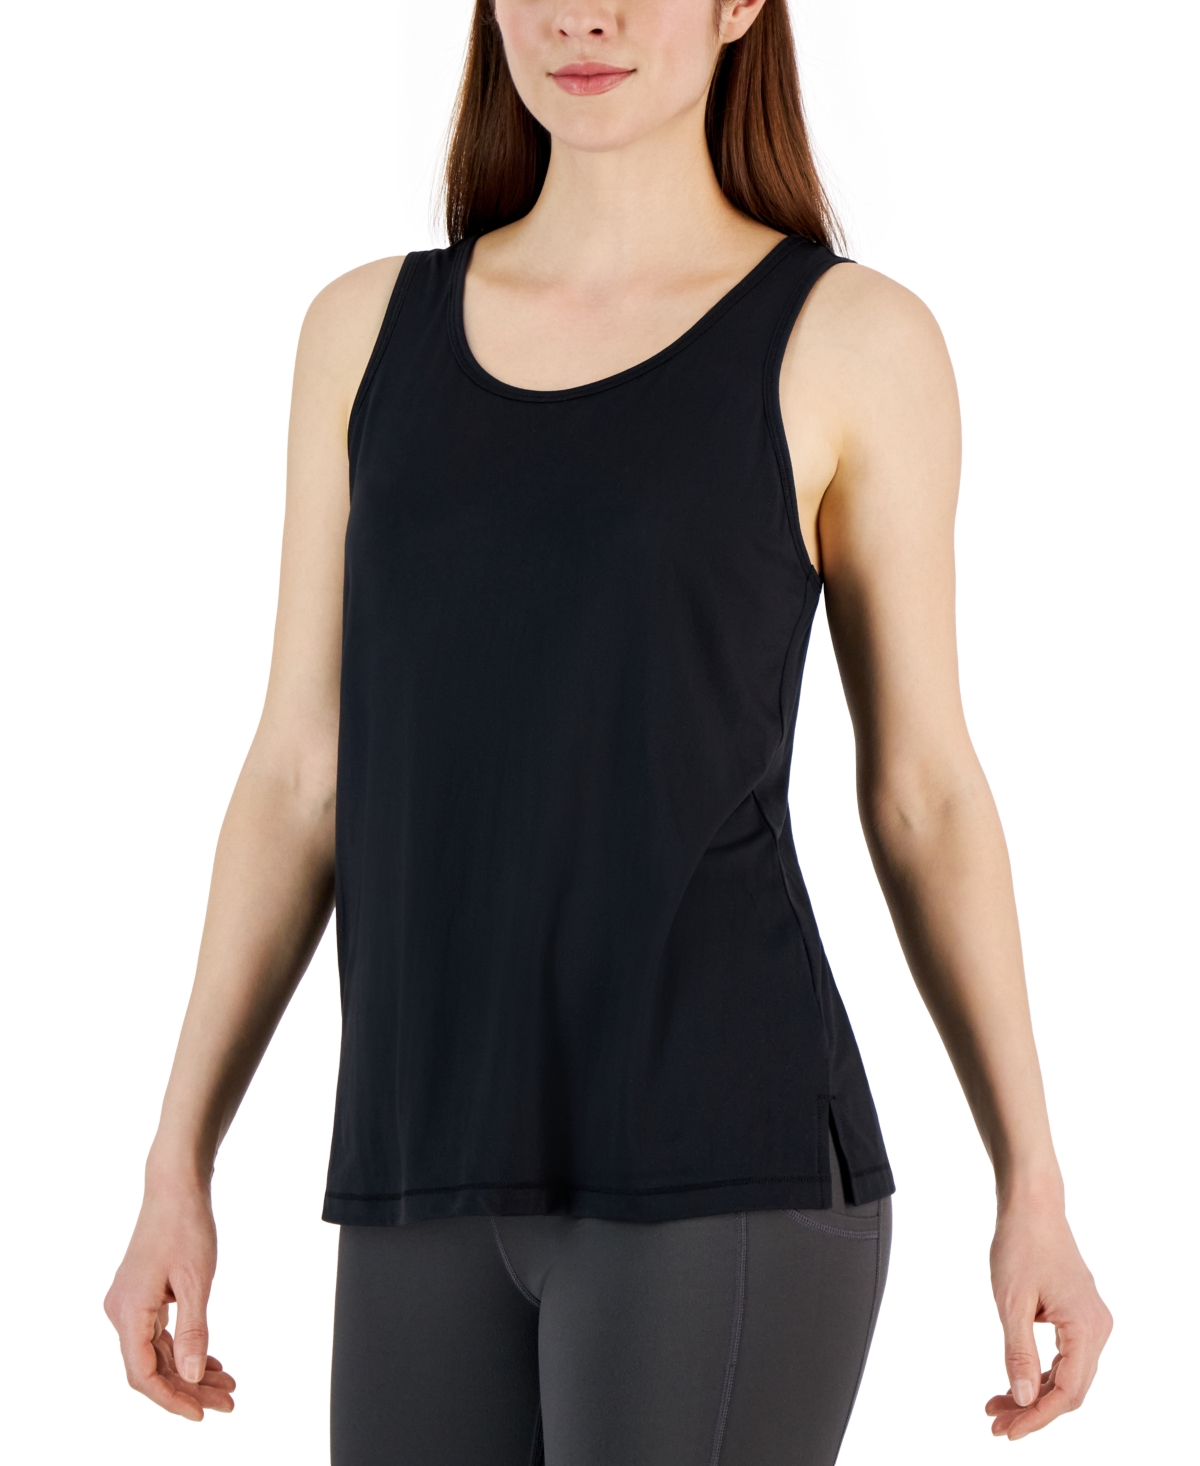 Women's Active 3 pk. Solid Tank Top, Created for Macy's - Black/white/pink